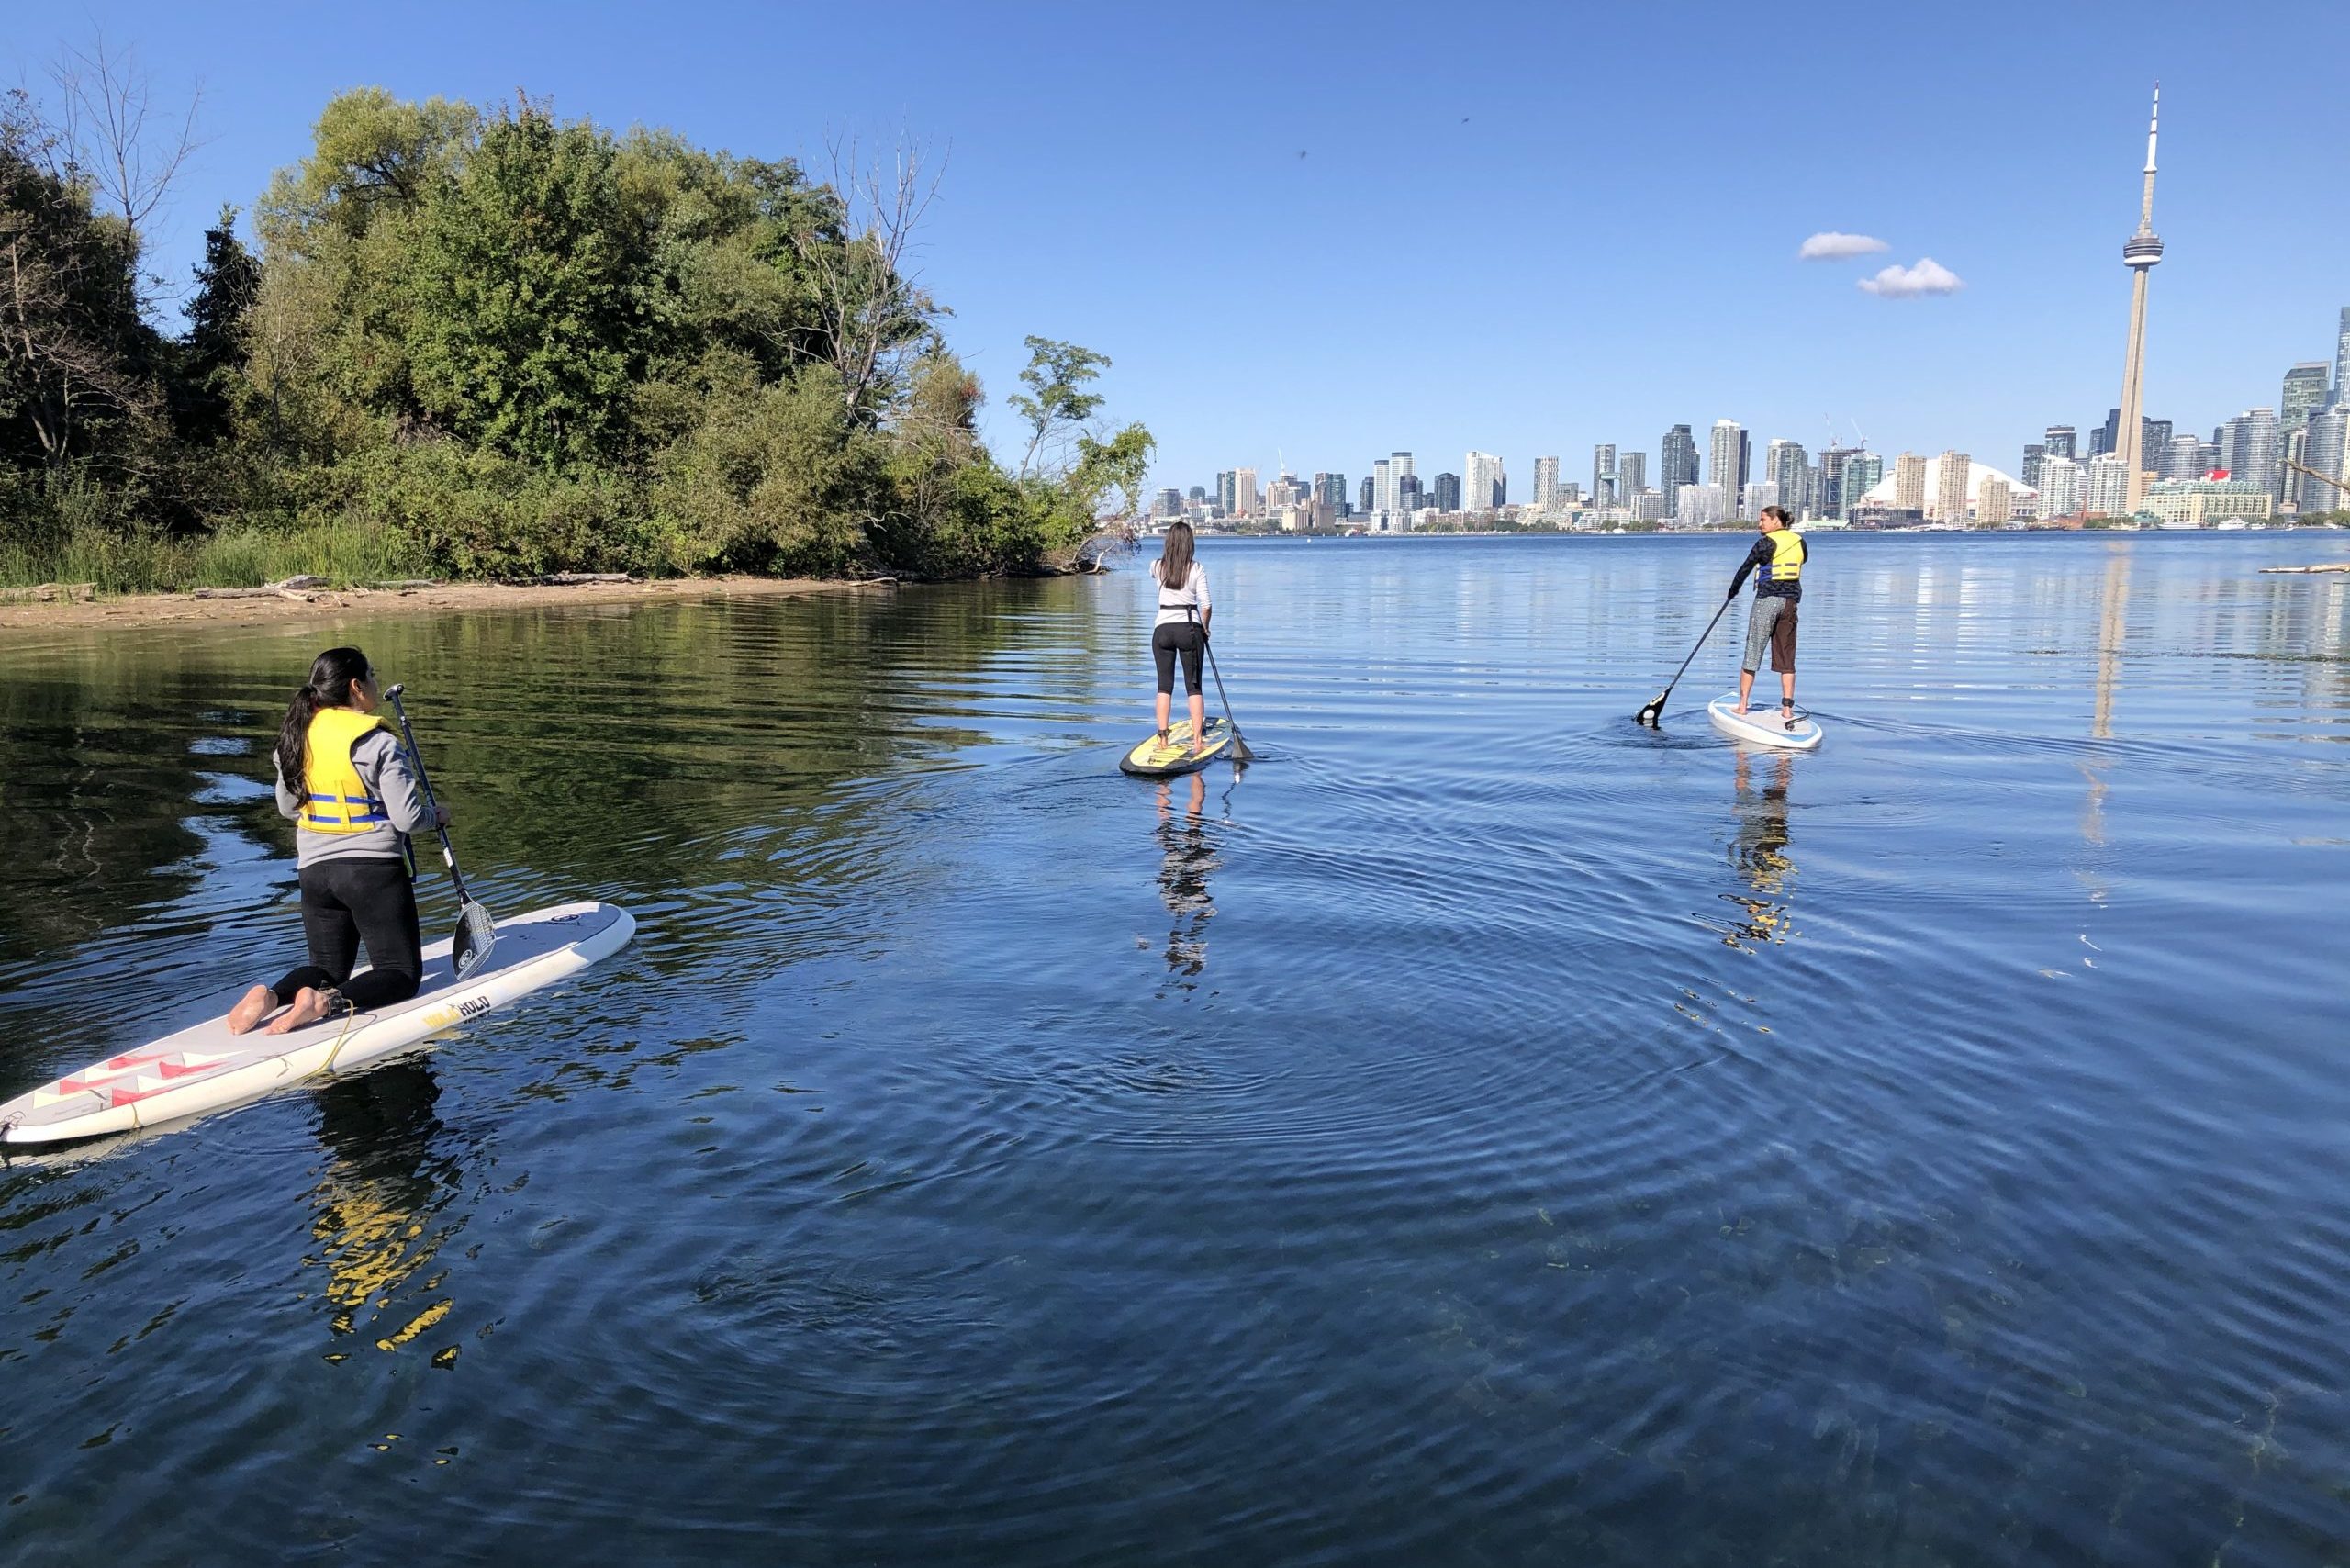 Three paddlers on stand-up boards paddle around Toronto Island with the Toronto skyline in the background.